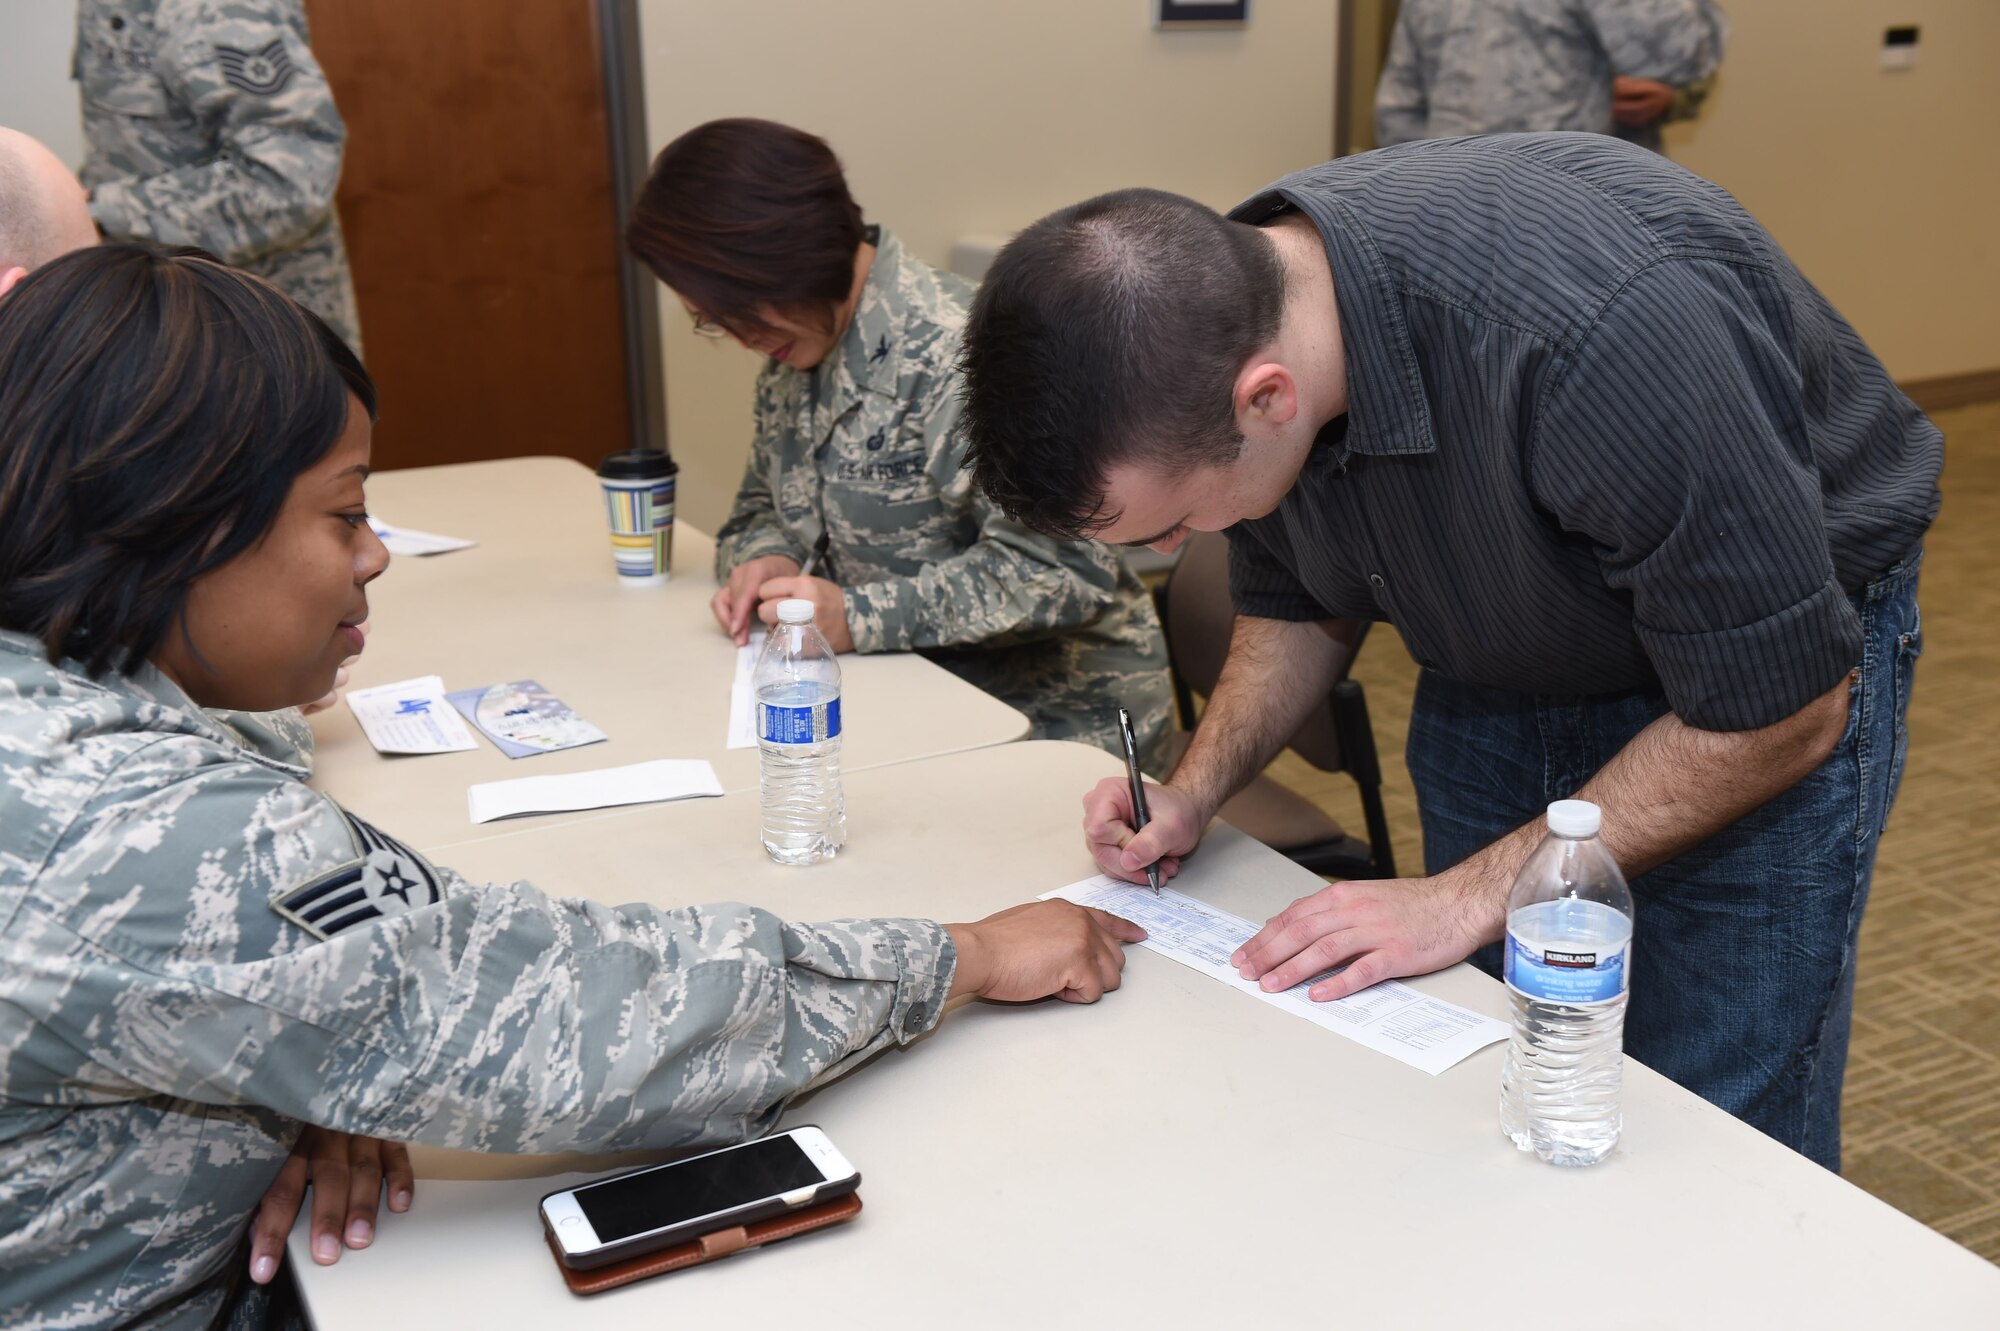 A Team Buckley member fills out a pledge card to donate to the Air Force Assistance Fund March 3, 2015, at the chapel on Buckley Air Force Base, Colo. The AFAF is designed to support Airmen and their families who are going through hardships such as family emergencies or financial troubles. (U.S. Air Force photo by Airman 1st Class Samantha Saulsbury/Released)